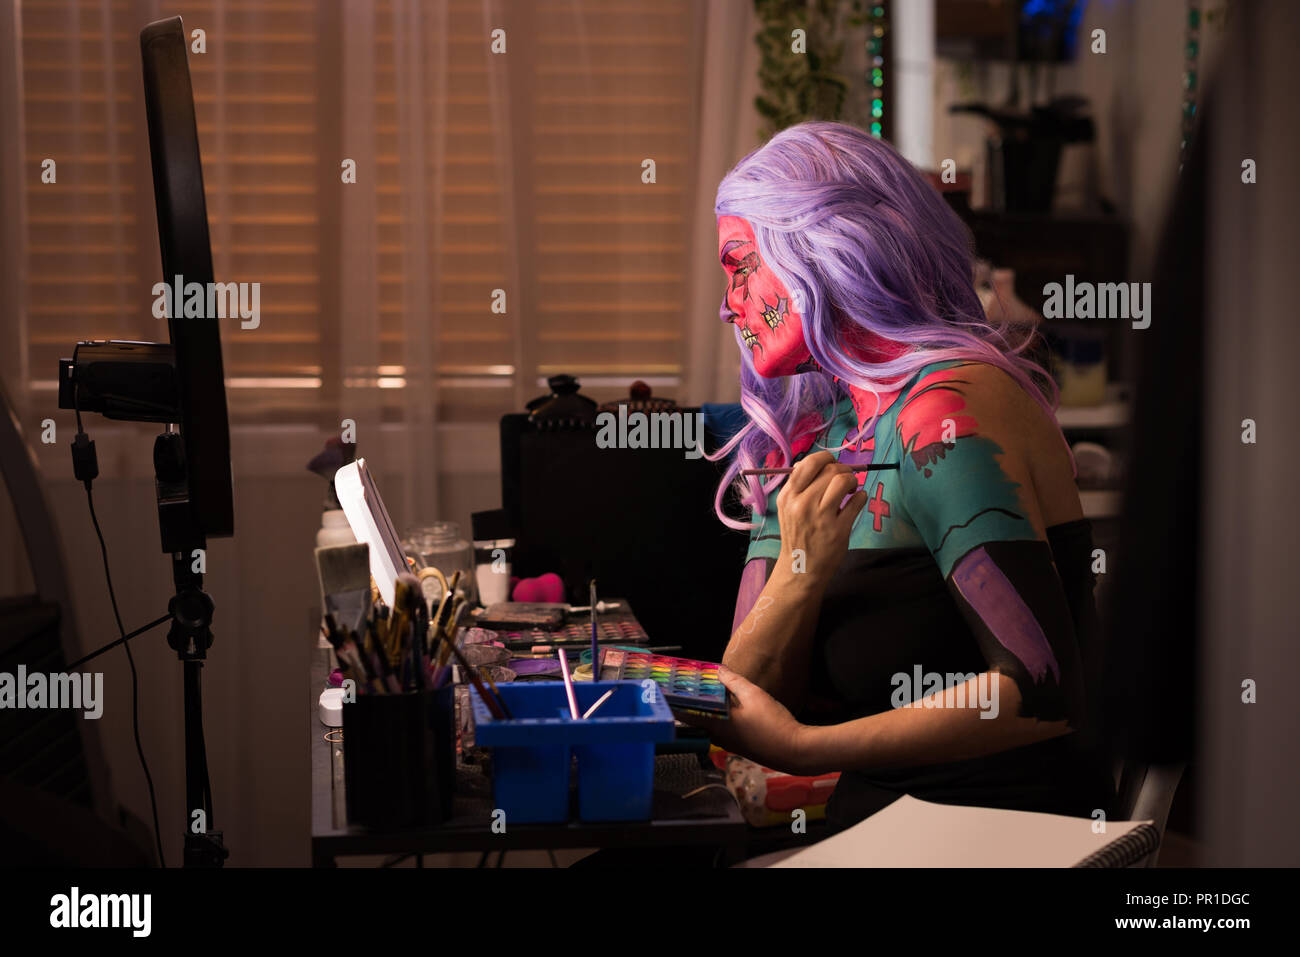 Woman painting her body Stock Photo